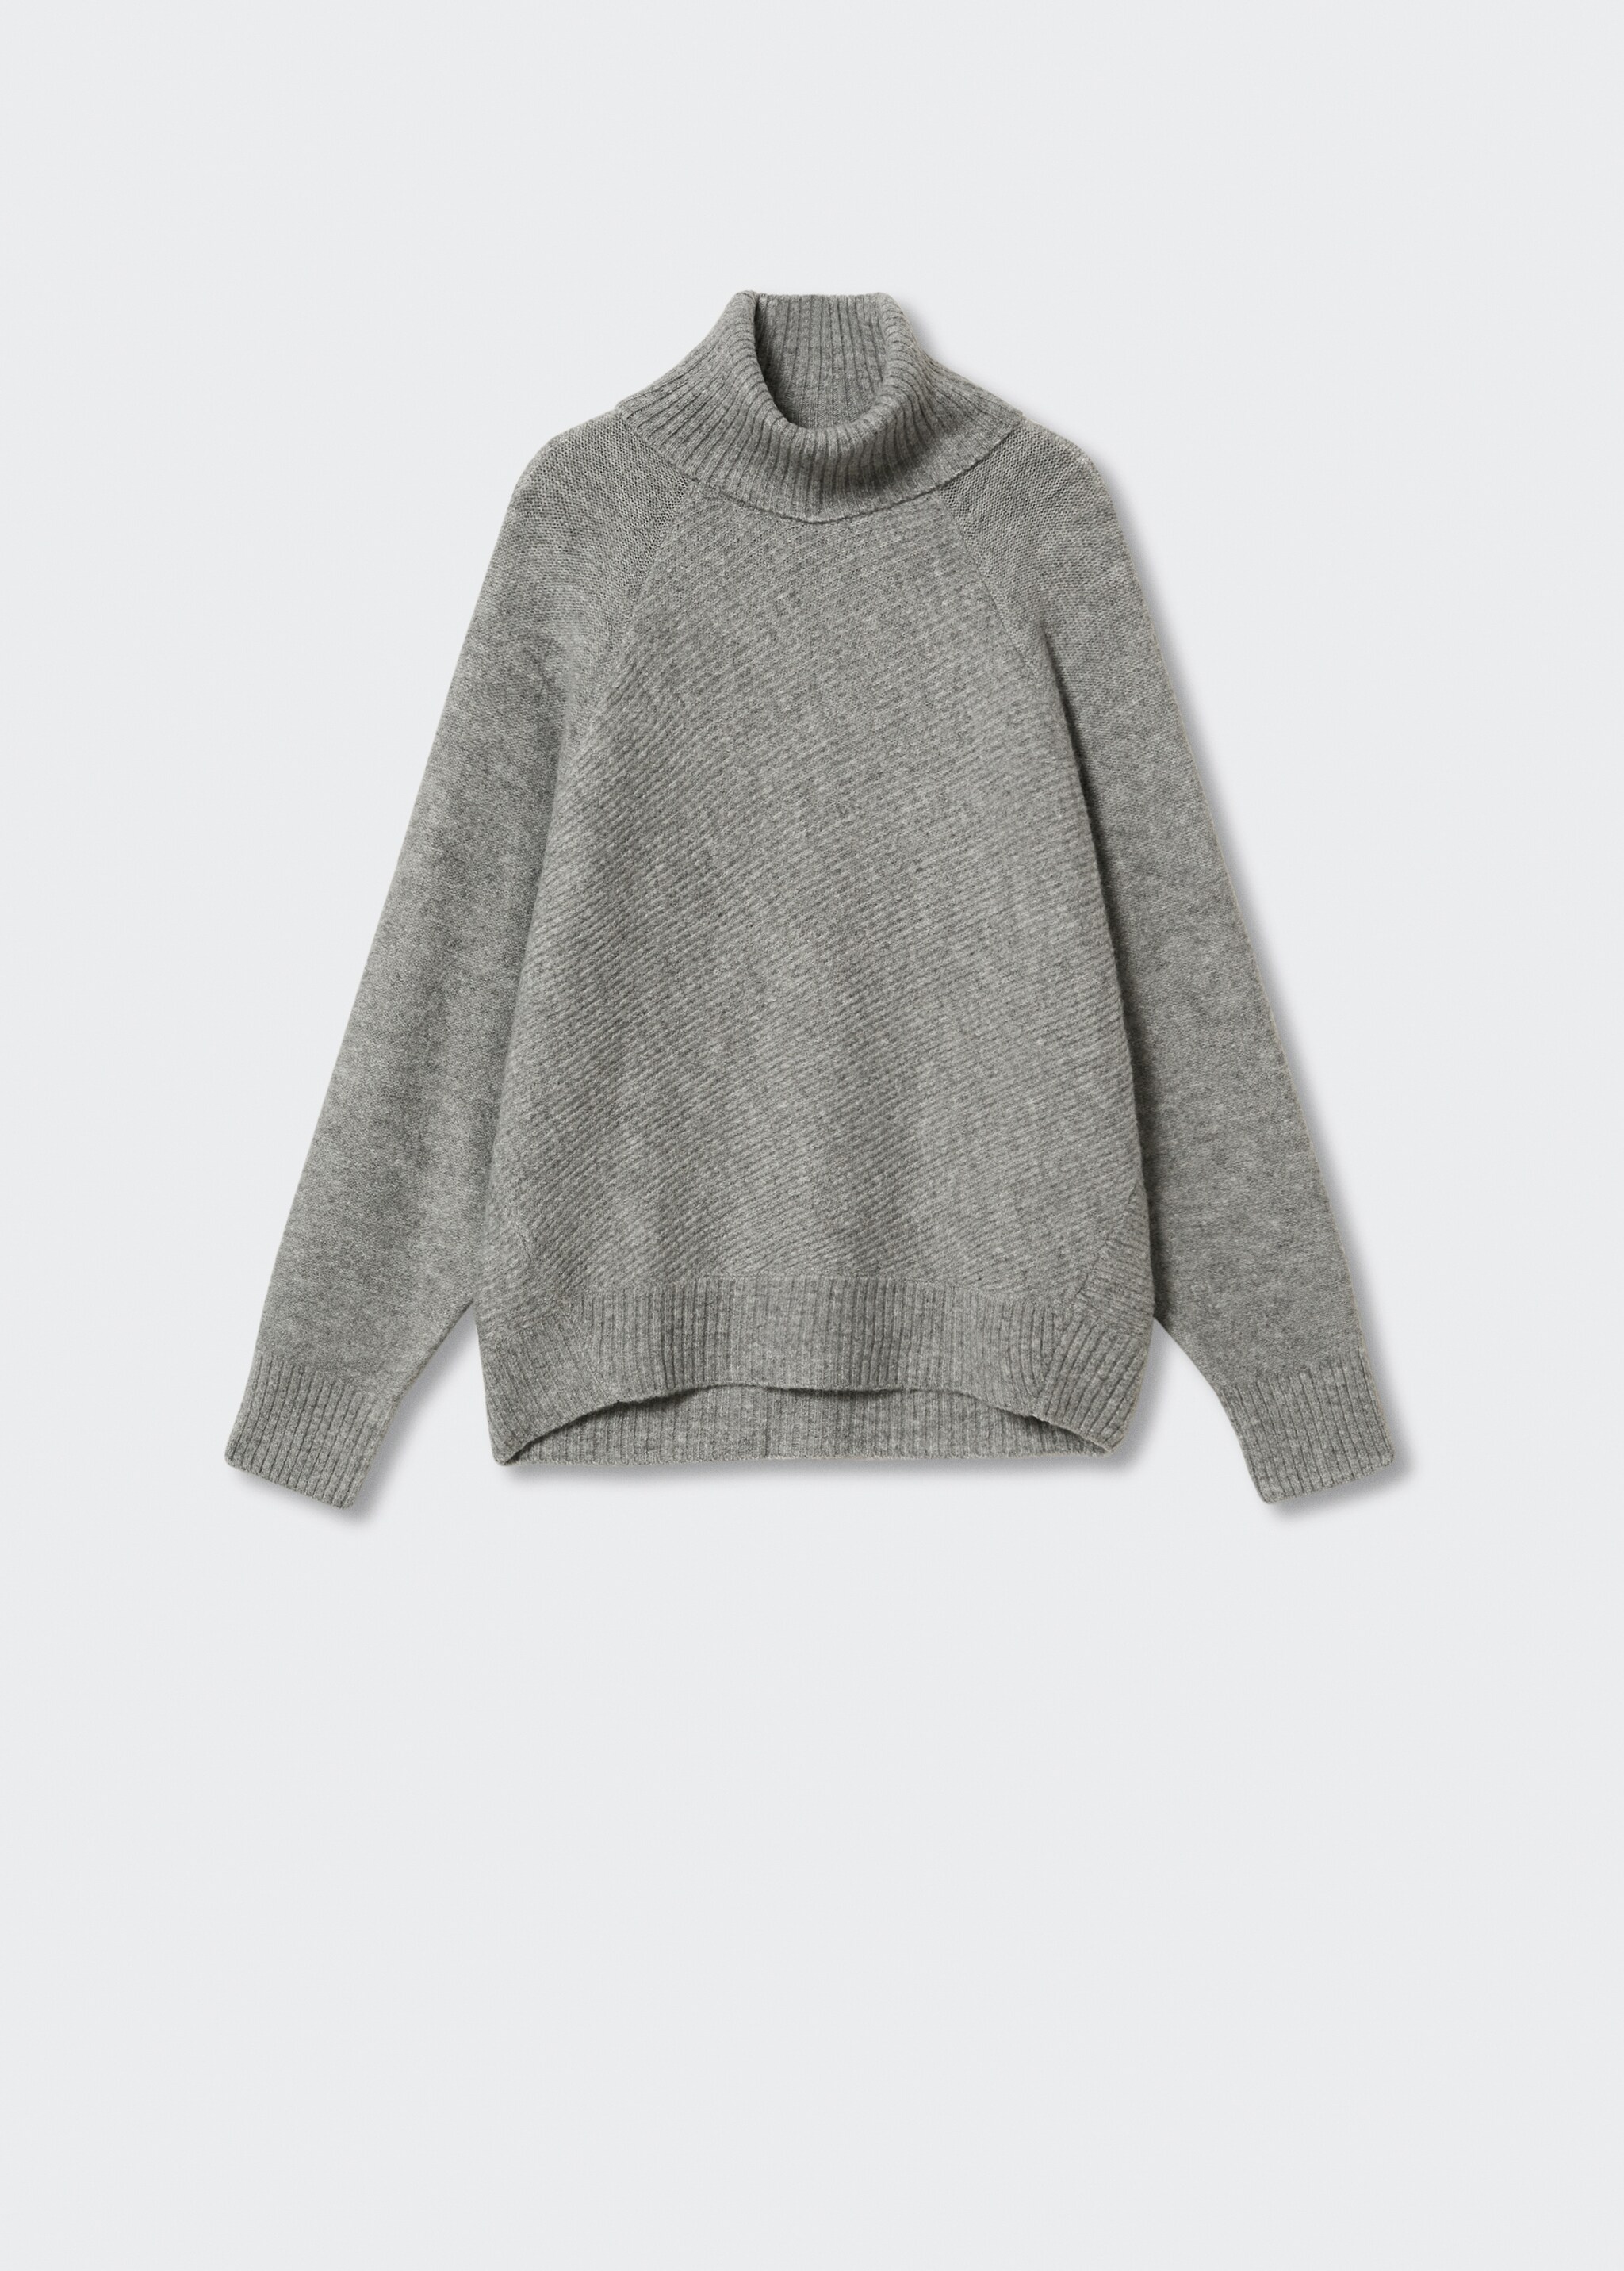 Turtle neck sweater - Article without model